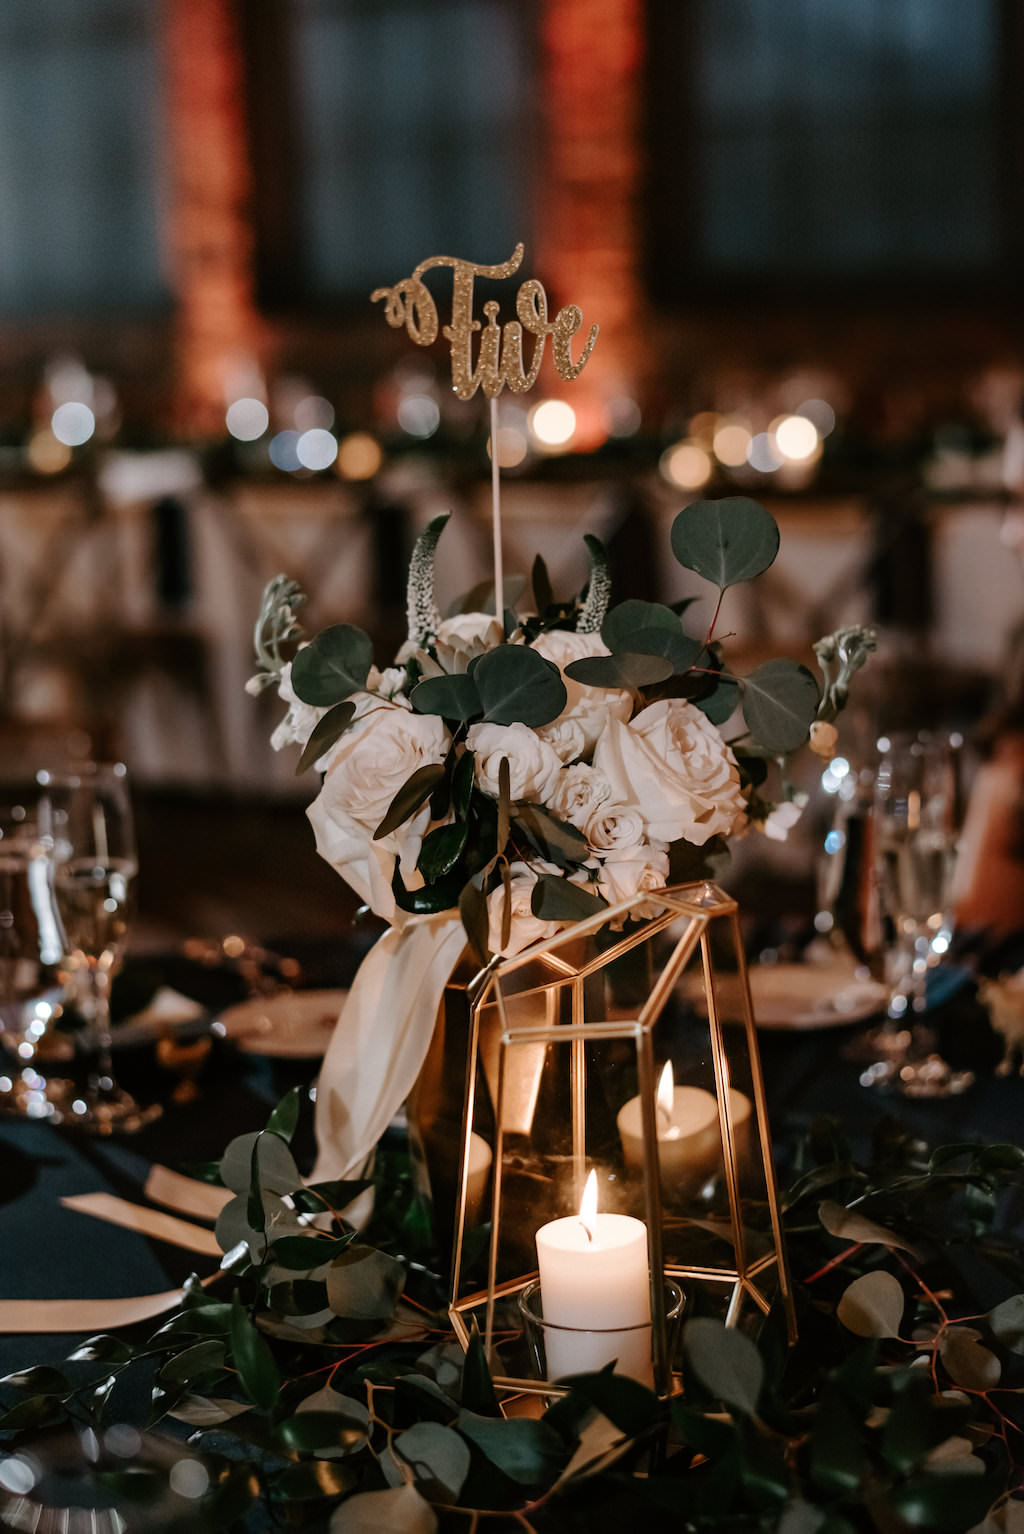 Modern, Geometric Industrial Gold Wedding Reception Decor, Low Floral Centerpiece, White, Ivory Roses with Greenery with Gold Glitter Table Number, Gold Geometric Candle Holder